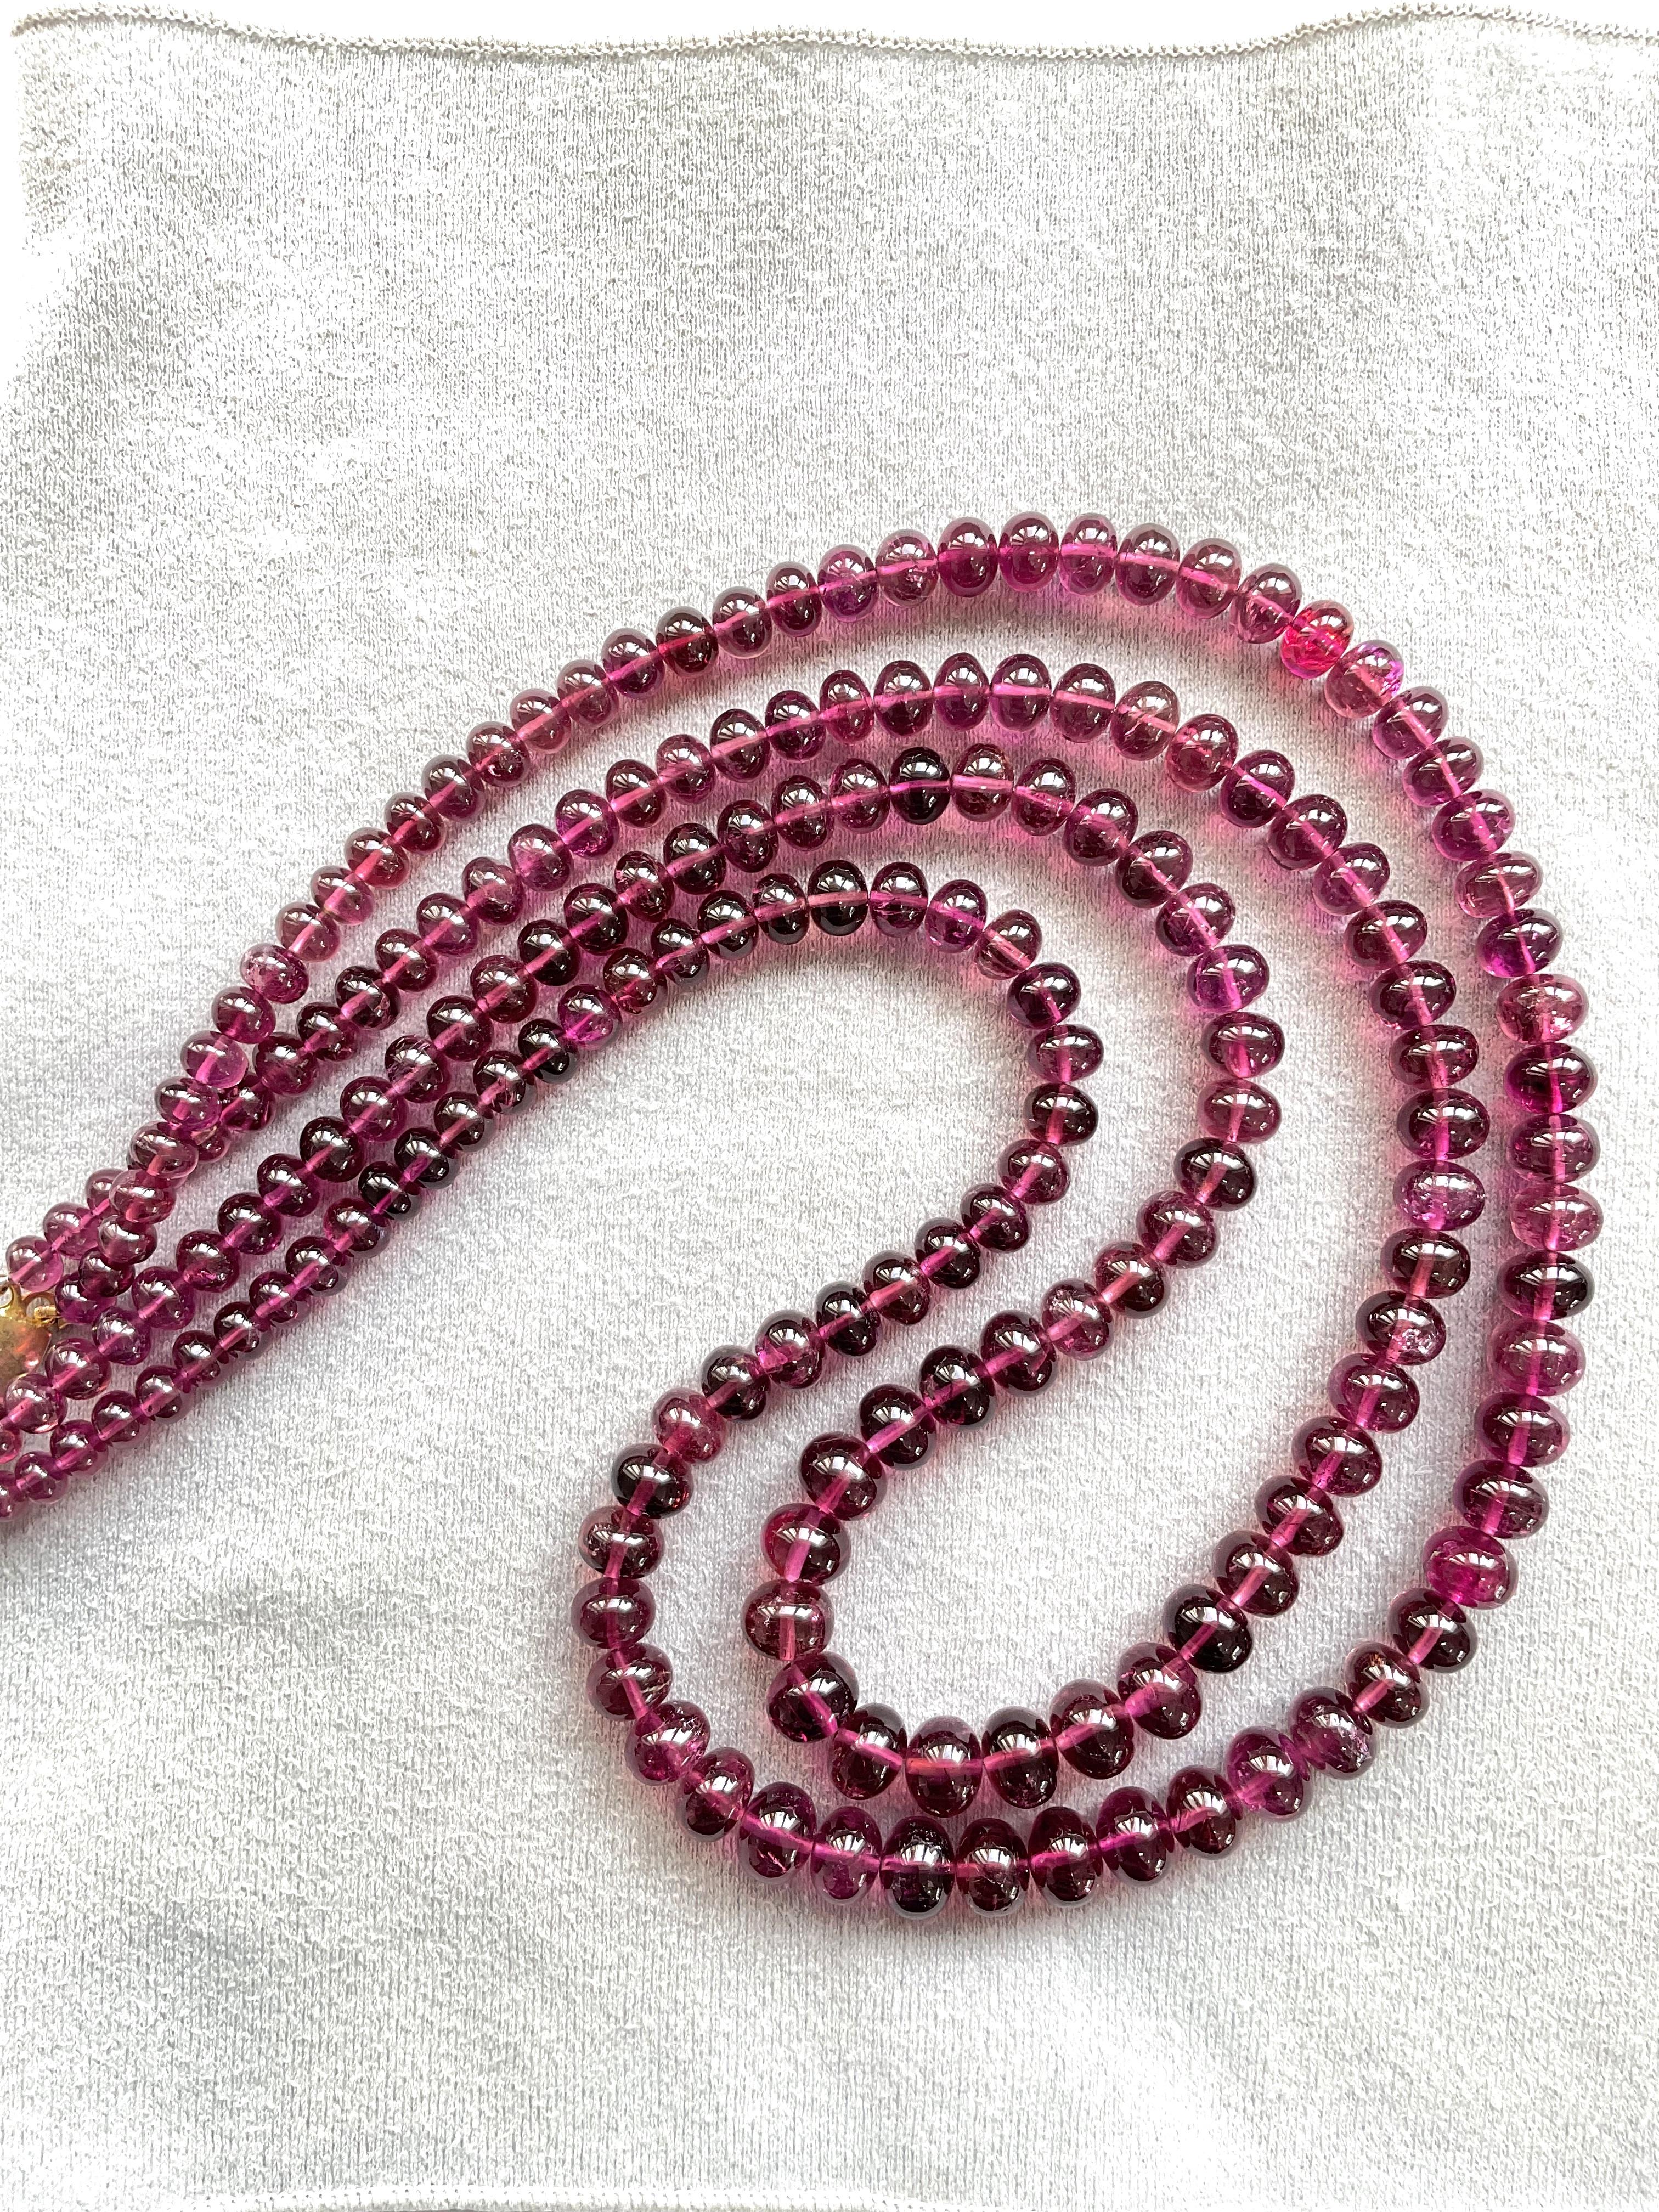 431.00 Carats Rubellite Tourmaline Plain Beads For Top Fine Jewelry Natural Gem For Sale 1